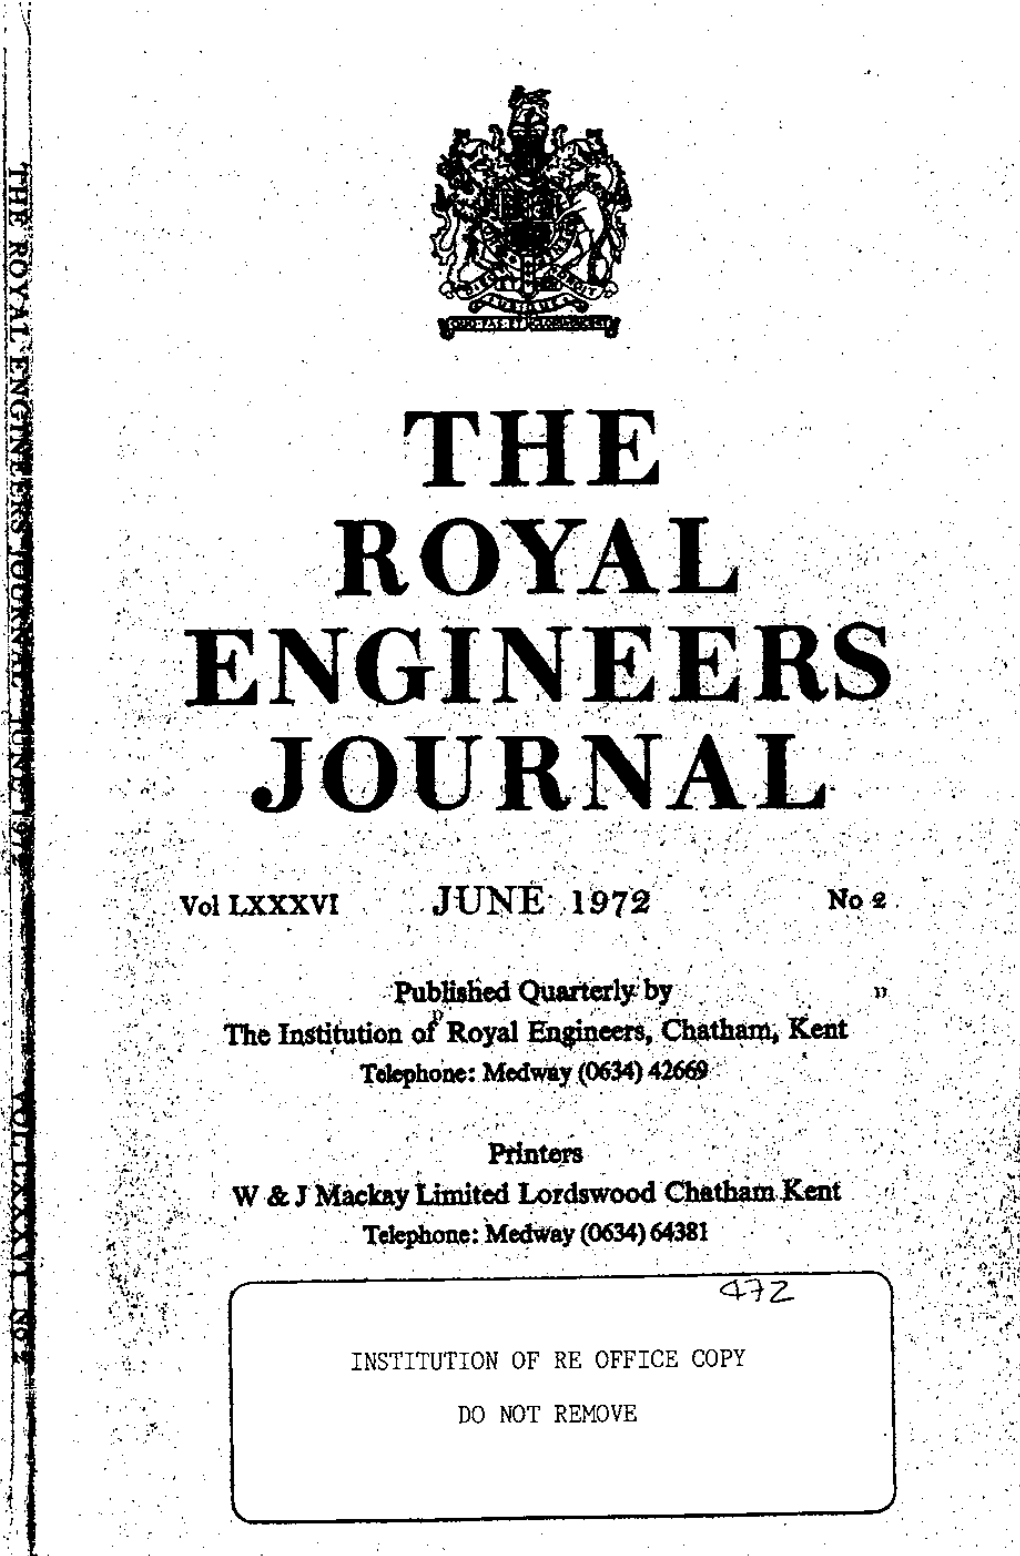 Engine Rs: ^:: Journal.::: 1 , ,,'~1 '.' .:.' :.,:''':'